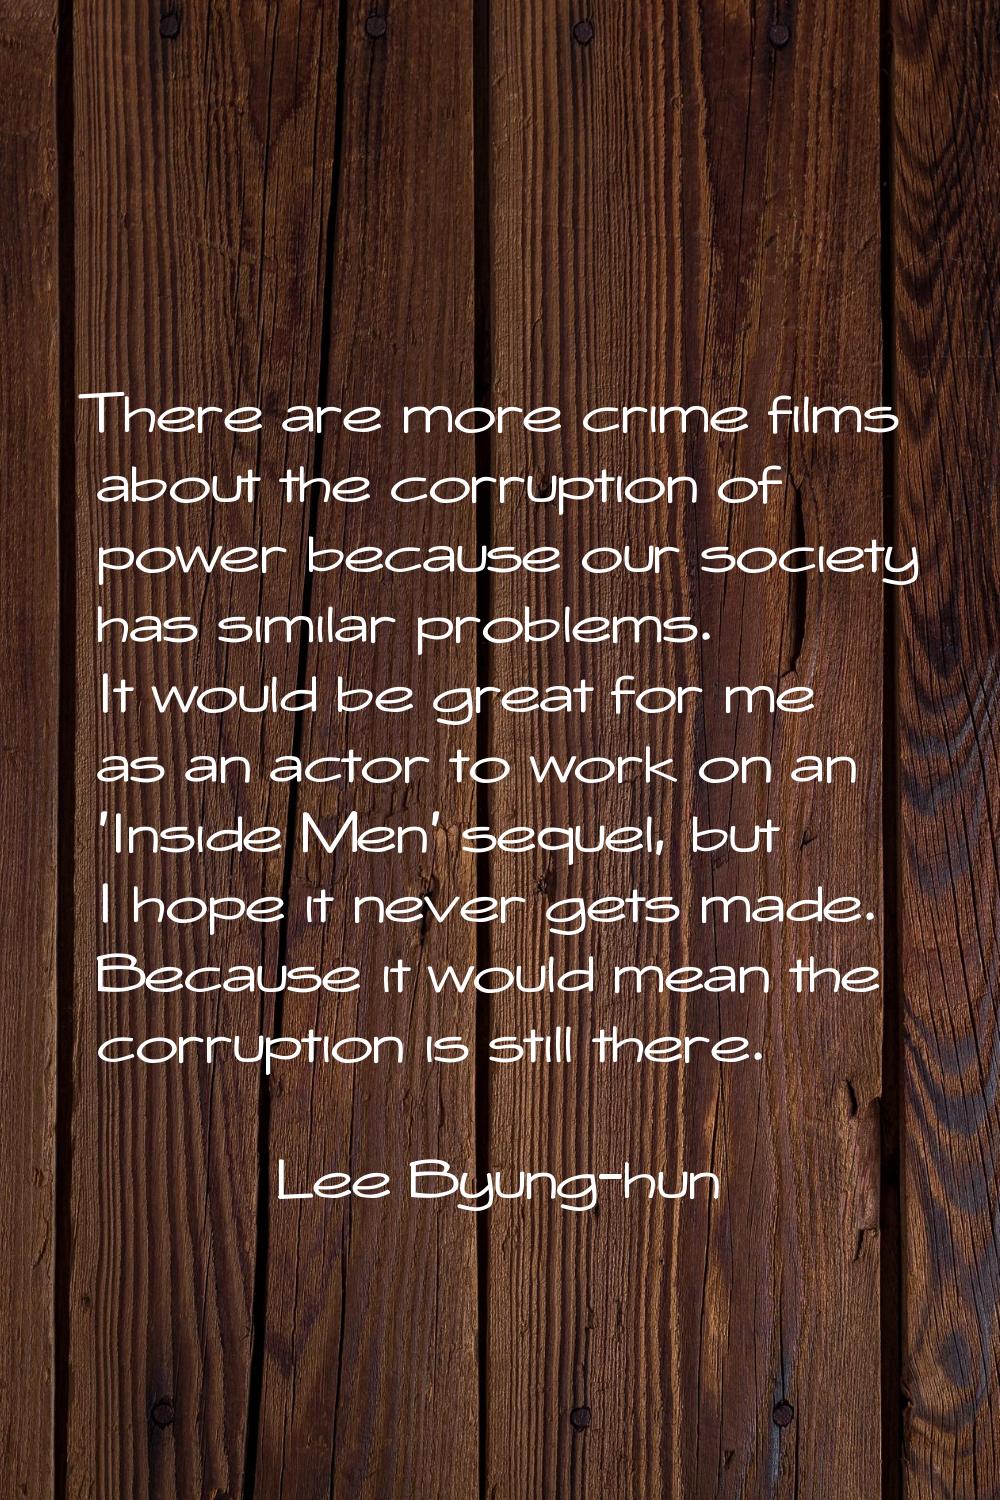 There are more crime films about the corruption of power because our society has similar problems. 